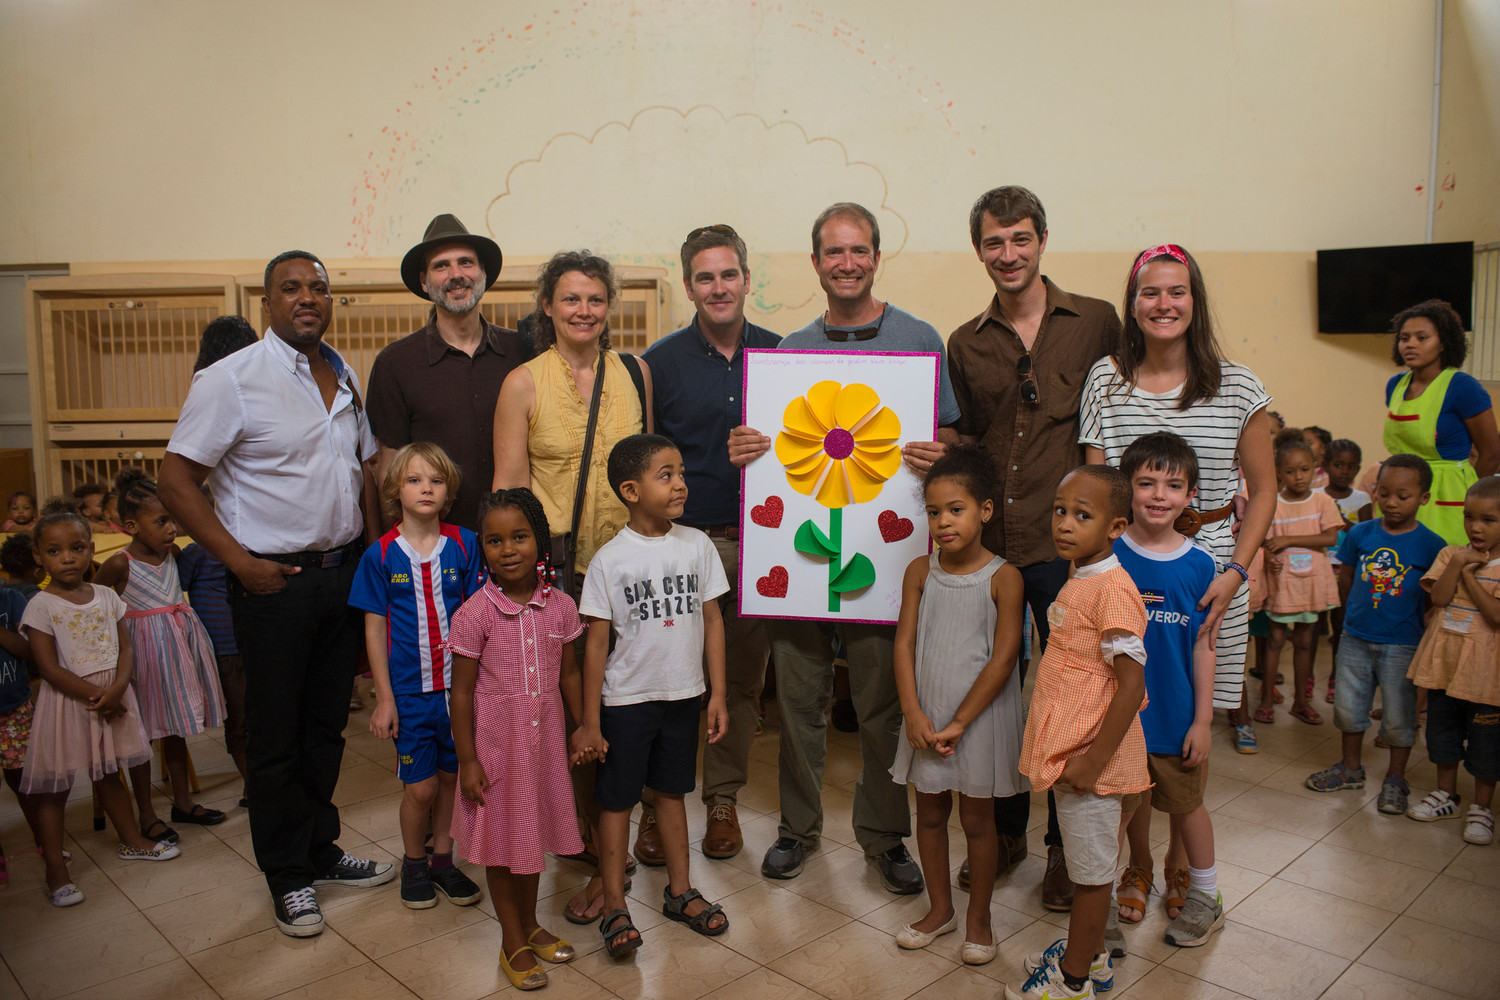 Mornagrass, Zerui Depina, Danny Knicely, Aimee Curl and Jared Pool, along with Jim Hagengruber, Jon Lohman, Grayson Lohman Nicole Steele and Oscar Knicely receive a gift from children at Associação Comunitaria Novos Amigos on Sao Vicente on 11/27/17.